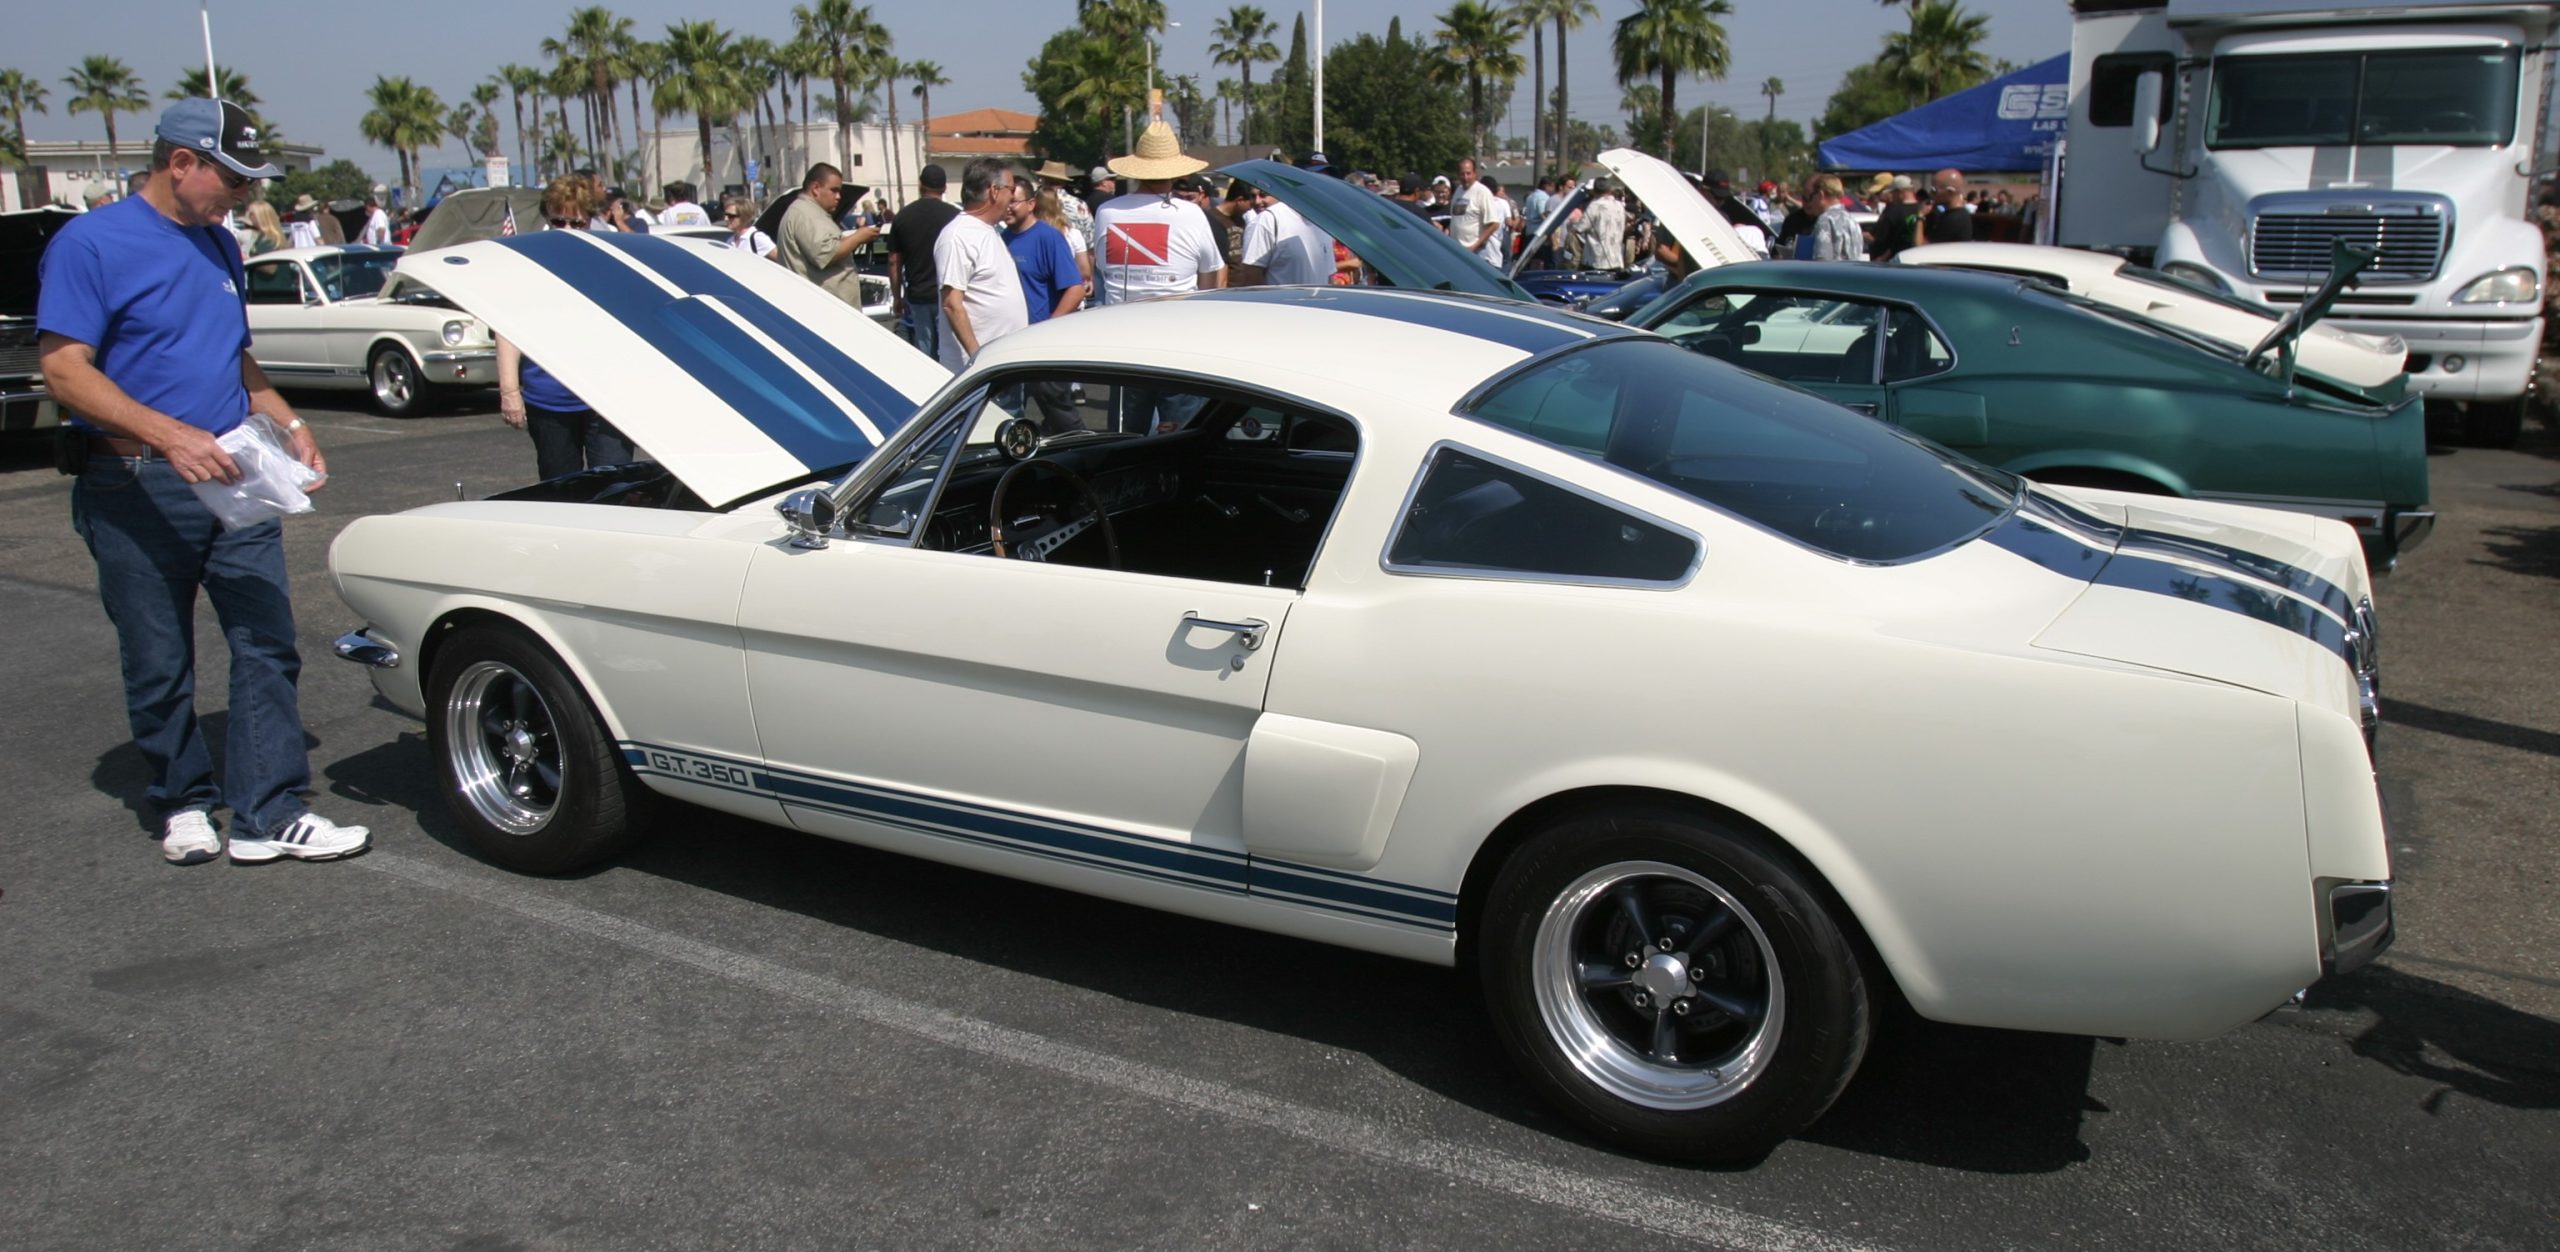 https://www.onallcylinders.com/wp-content/uploads/2022/02/10/shelby-mustang-gt350-scaled.jpg